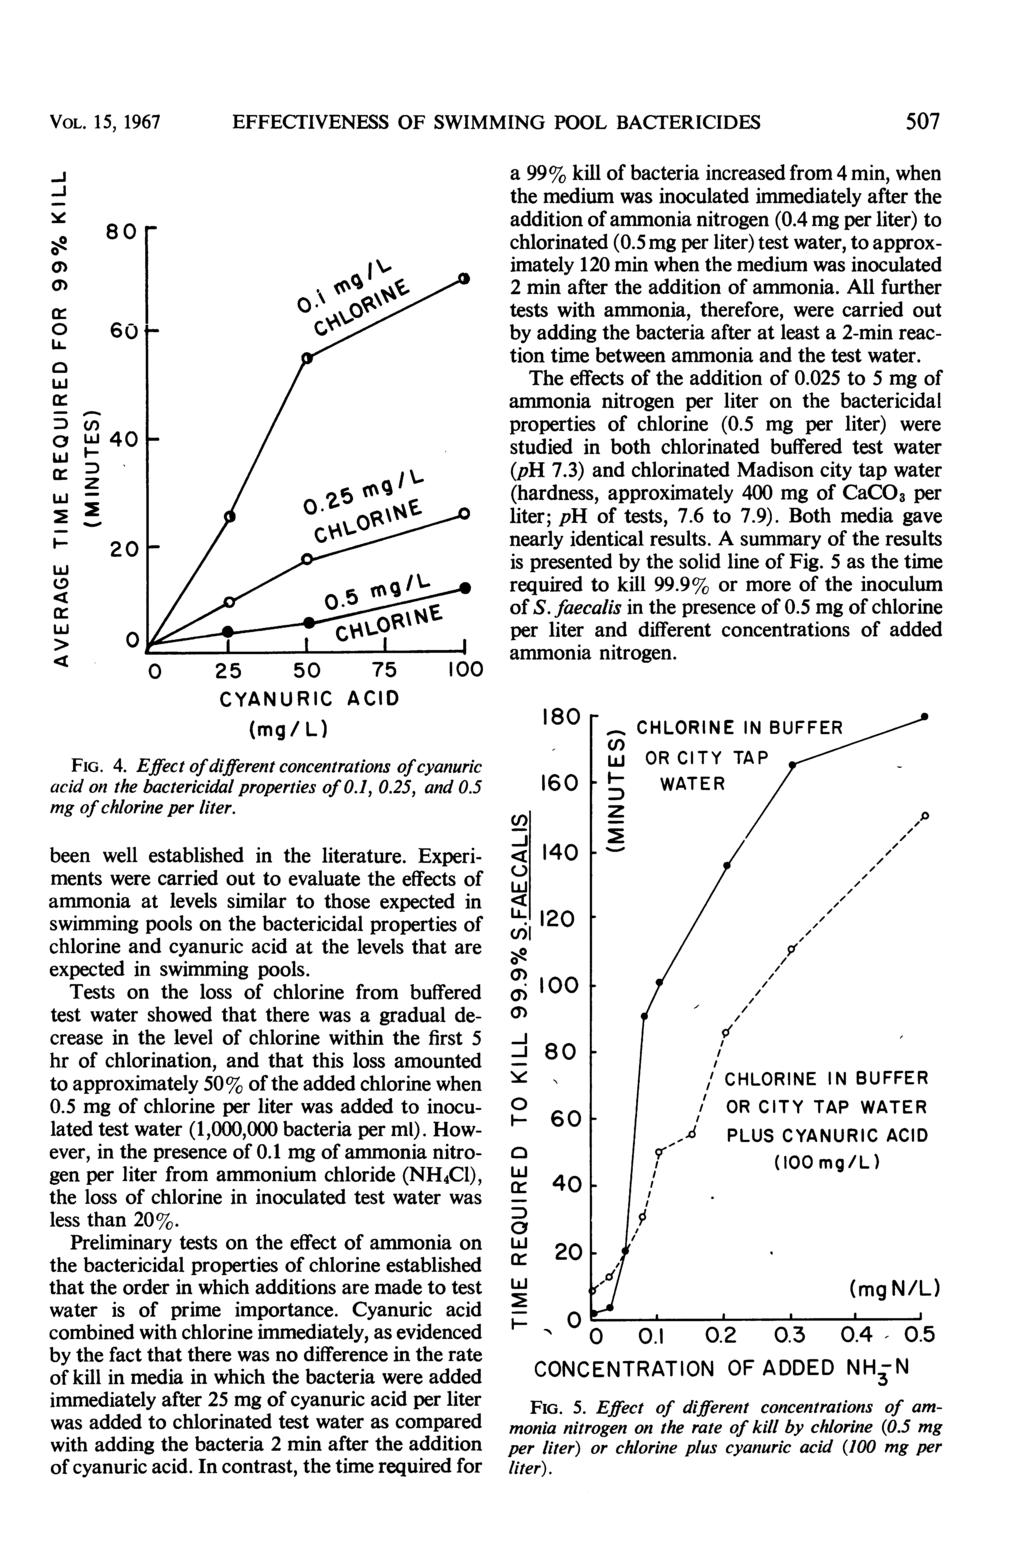 VOL. 1 5, 1967 EFFECTIVENESS OF SWIMMING POOL BACTERICIDES 57 -J -j y _o ) LL a o: : Zn z I.- 44- I8 25 5 75 1 CYANURIC ACID (mg/l) FIG. 4. Effect ofdifferent concentrations ofcyanuric acid on the bactericidal properties of.